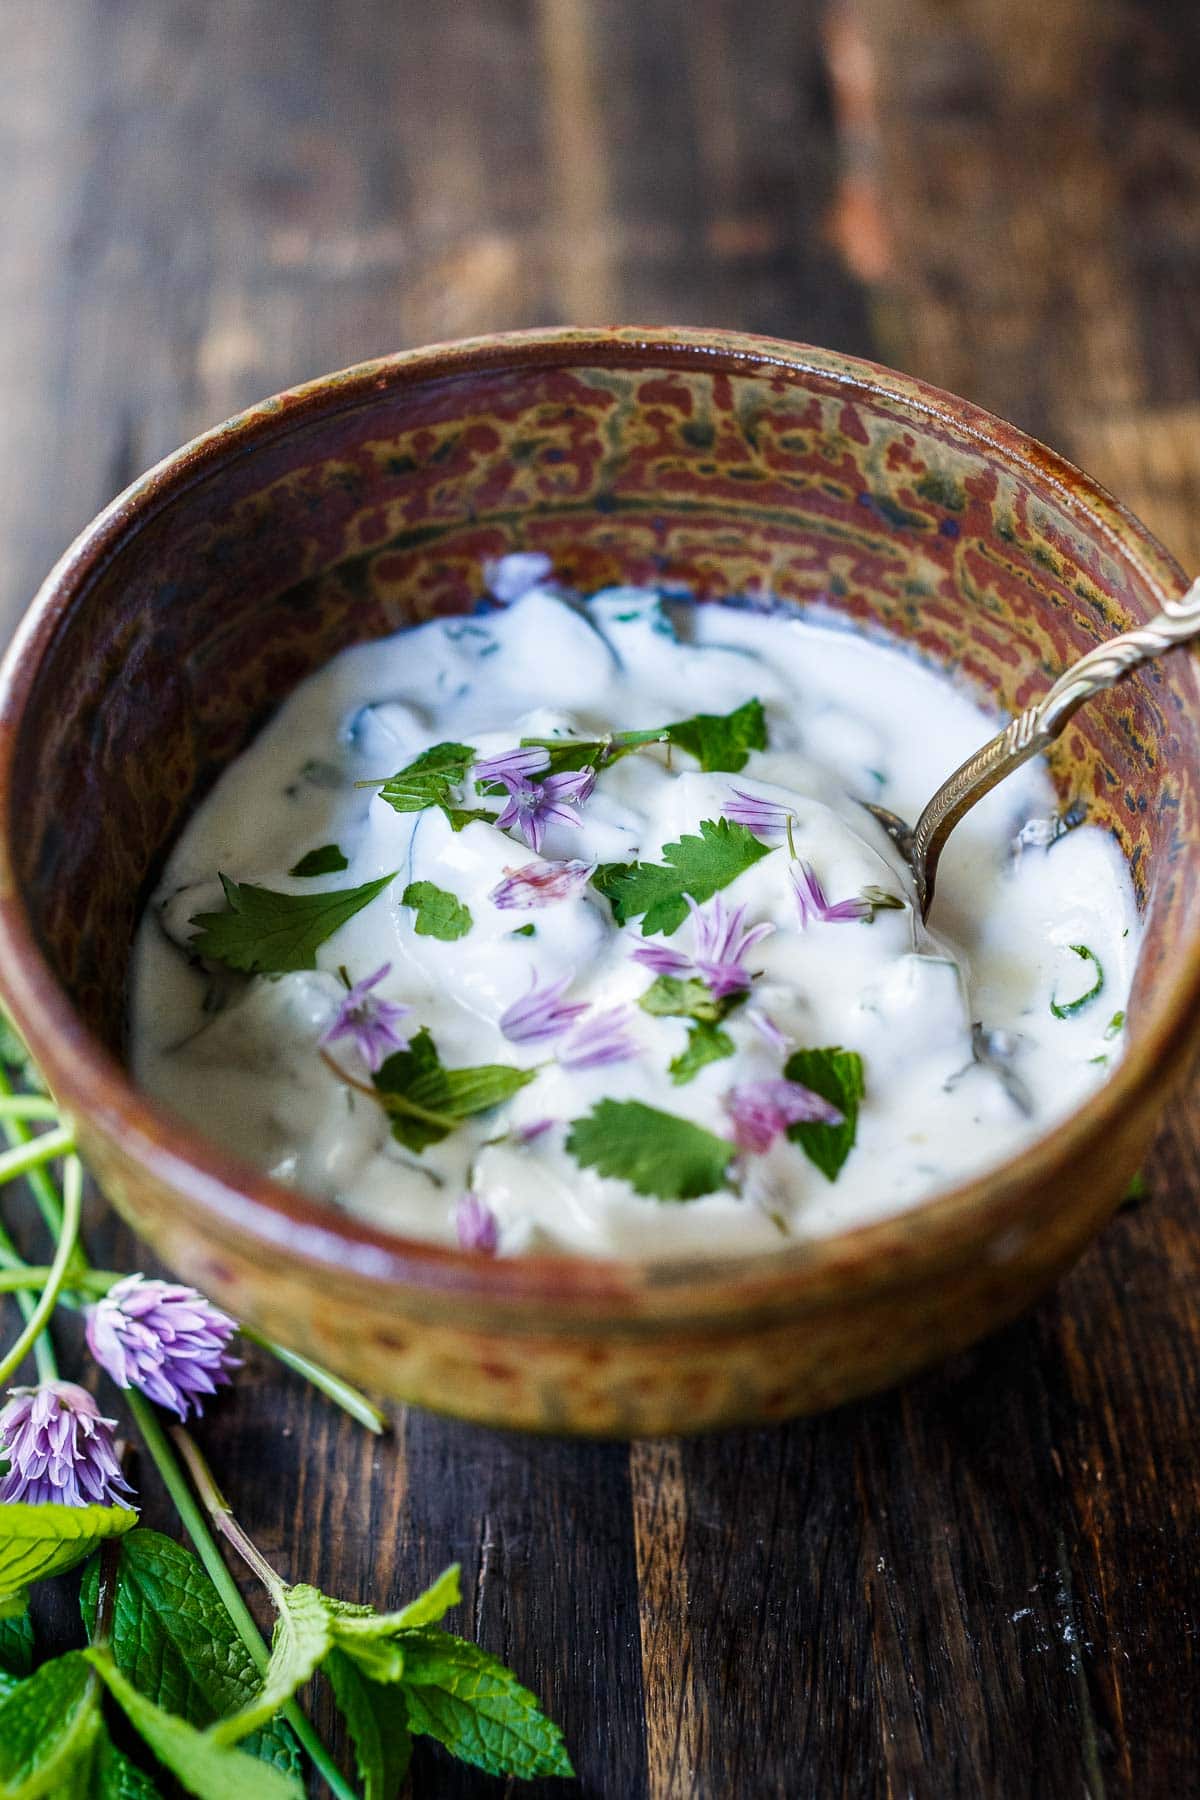 An authentic recipe for Raita- a creamy Indian yogurt sauce with cucumber, mint and cilantro. Cooling and refreshing, serve this with spicy Indian dishes to help cool the palate.